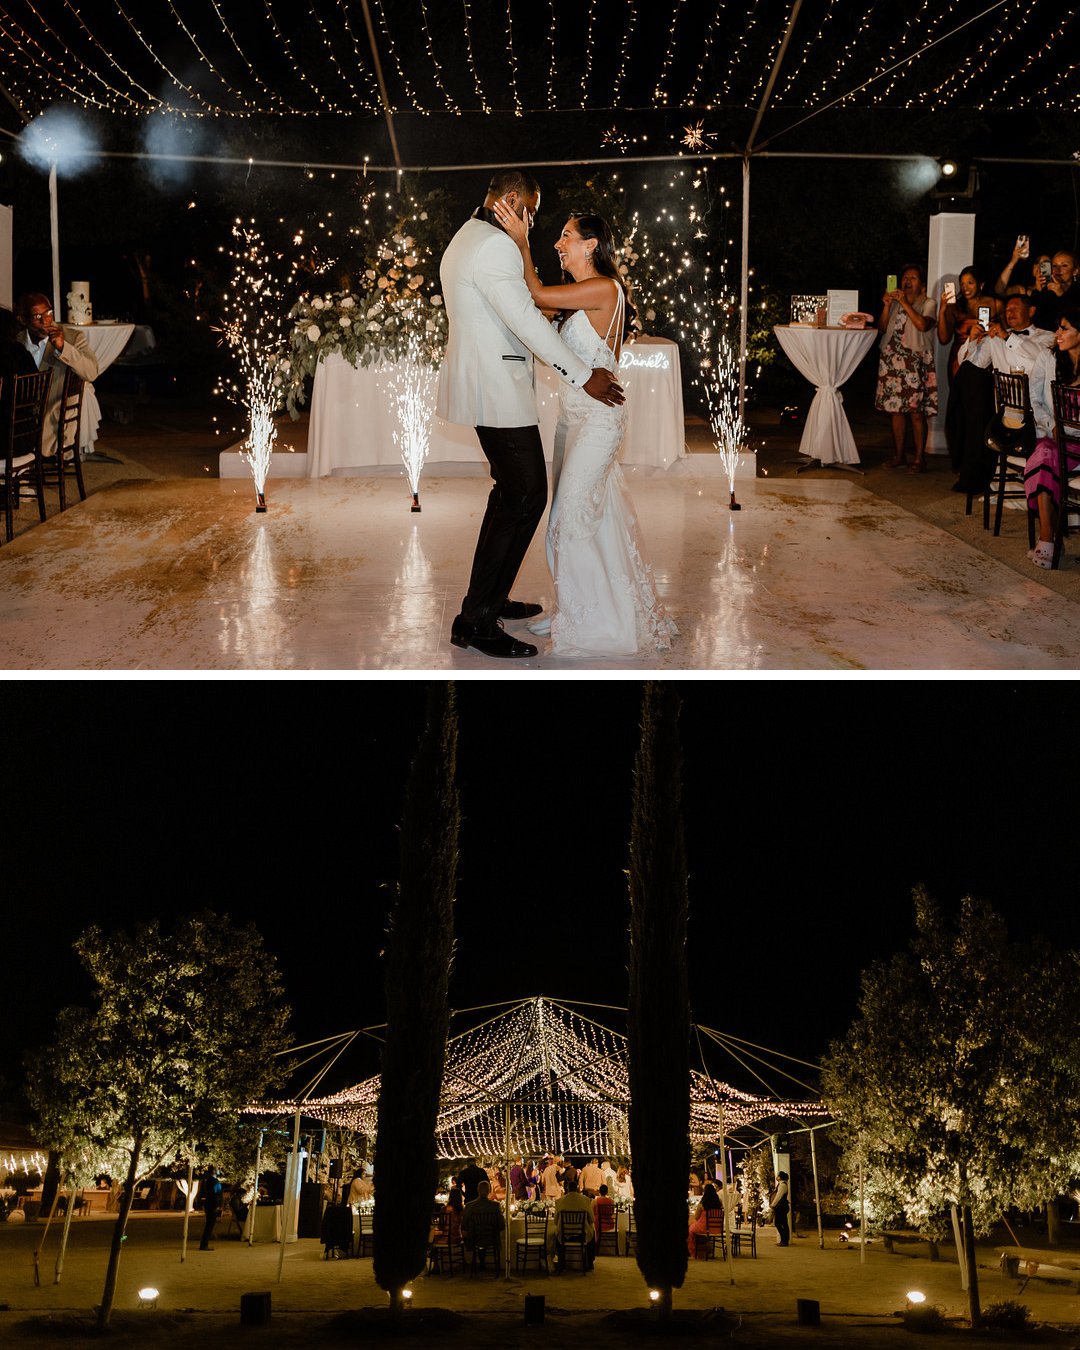 the bride and groom embrace while cold fireworks shoot off, wide shot of the Mexico wedding reception with fairy lights above